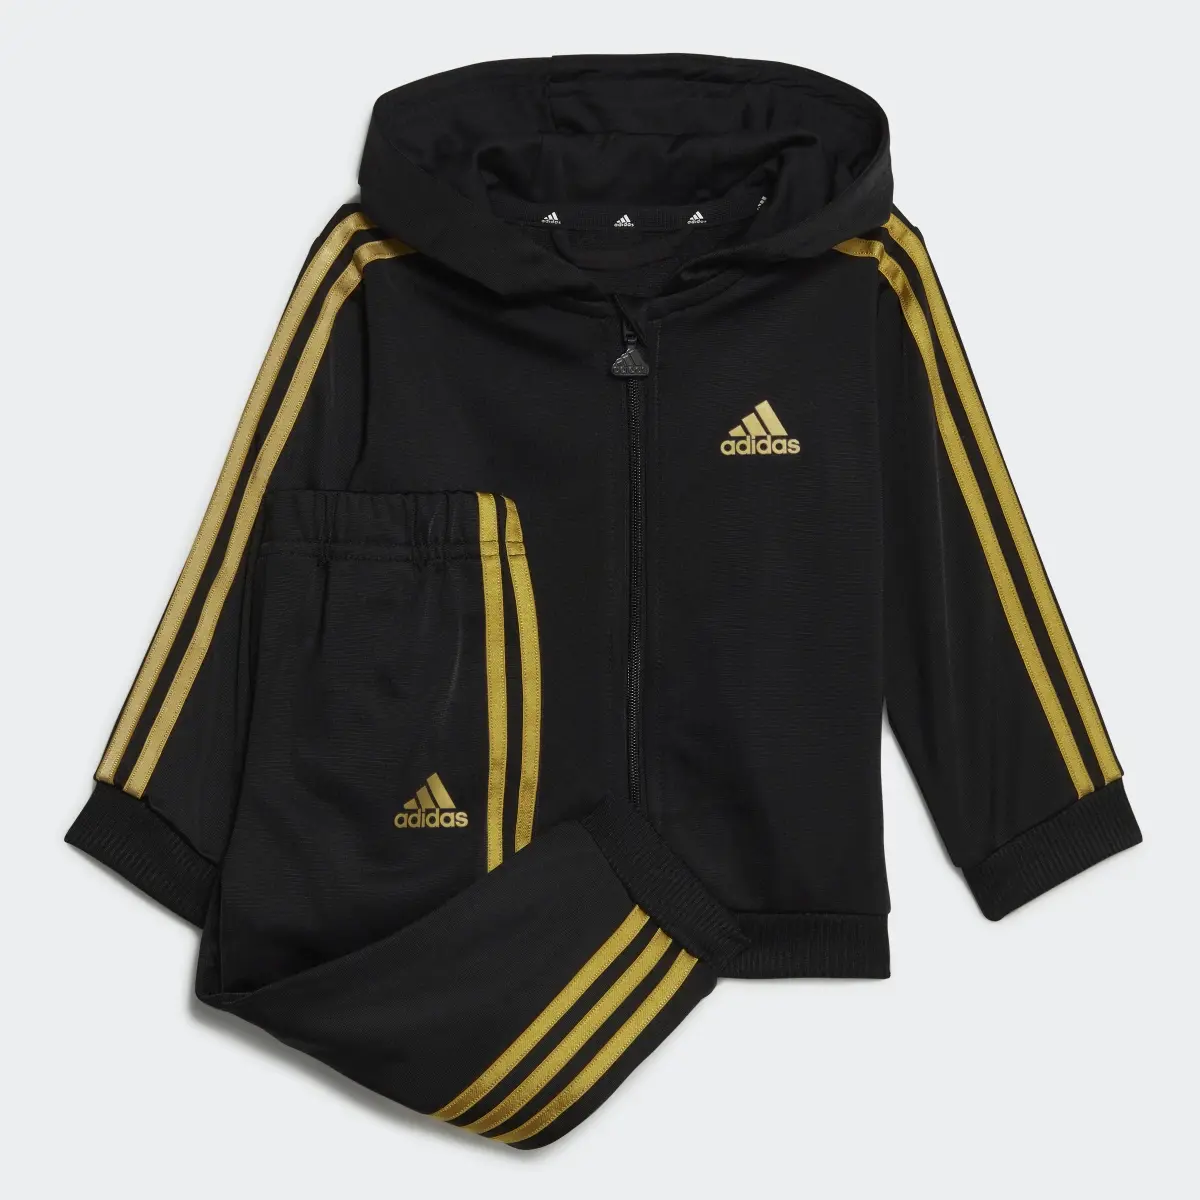 Adidas Essentials Shiny Hooded Track Suit. 2